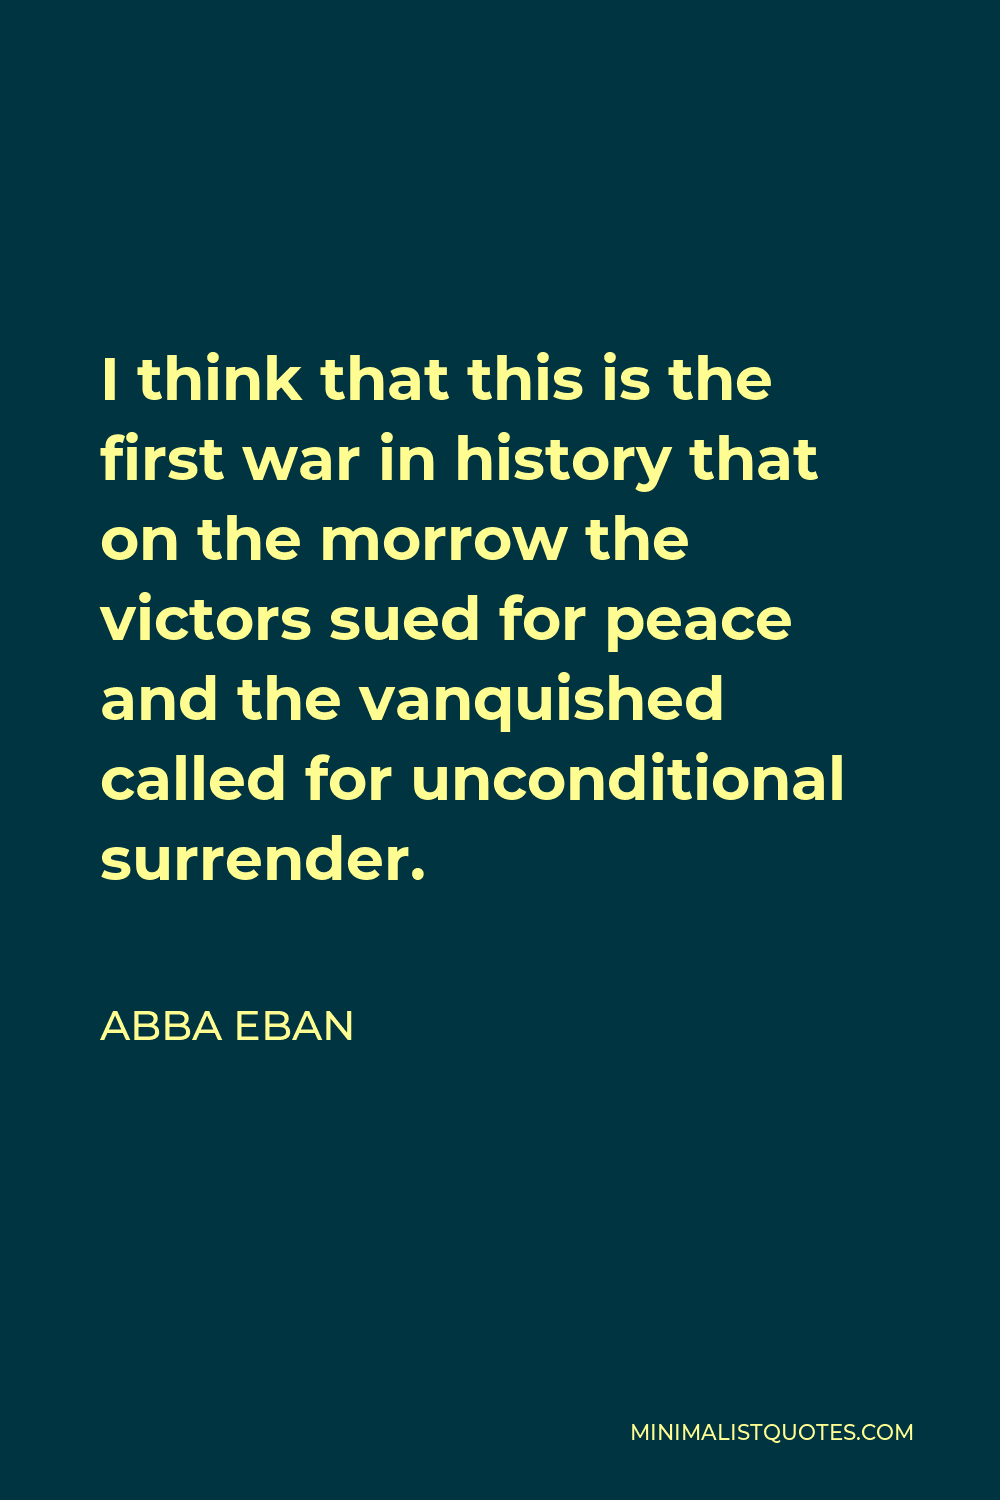 Abba Eban Quote - I think that this is the first war in history that on the morrow the victors sued for peace and the vanquished called for unconditional surrender.